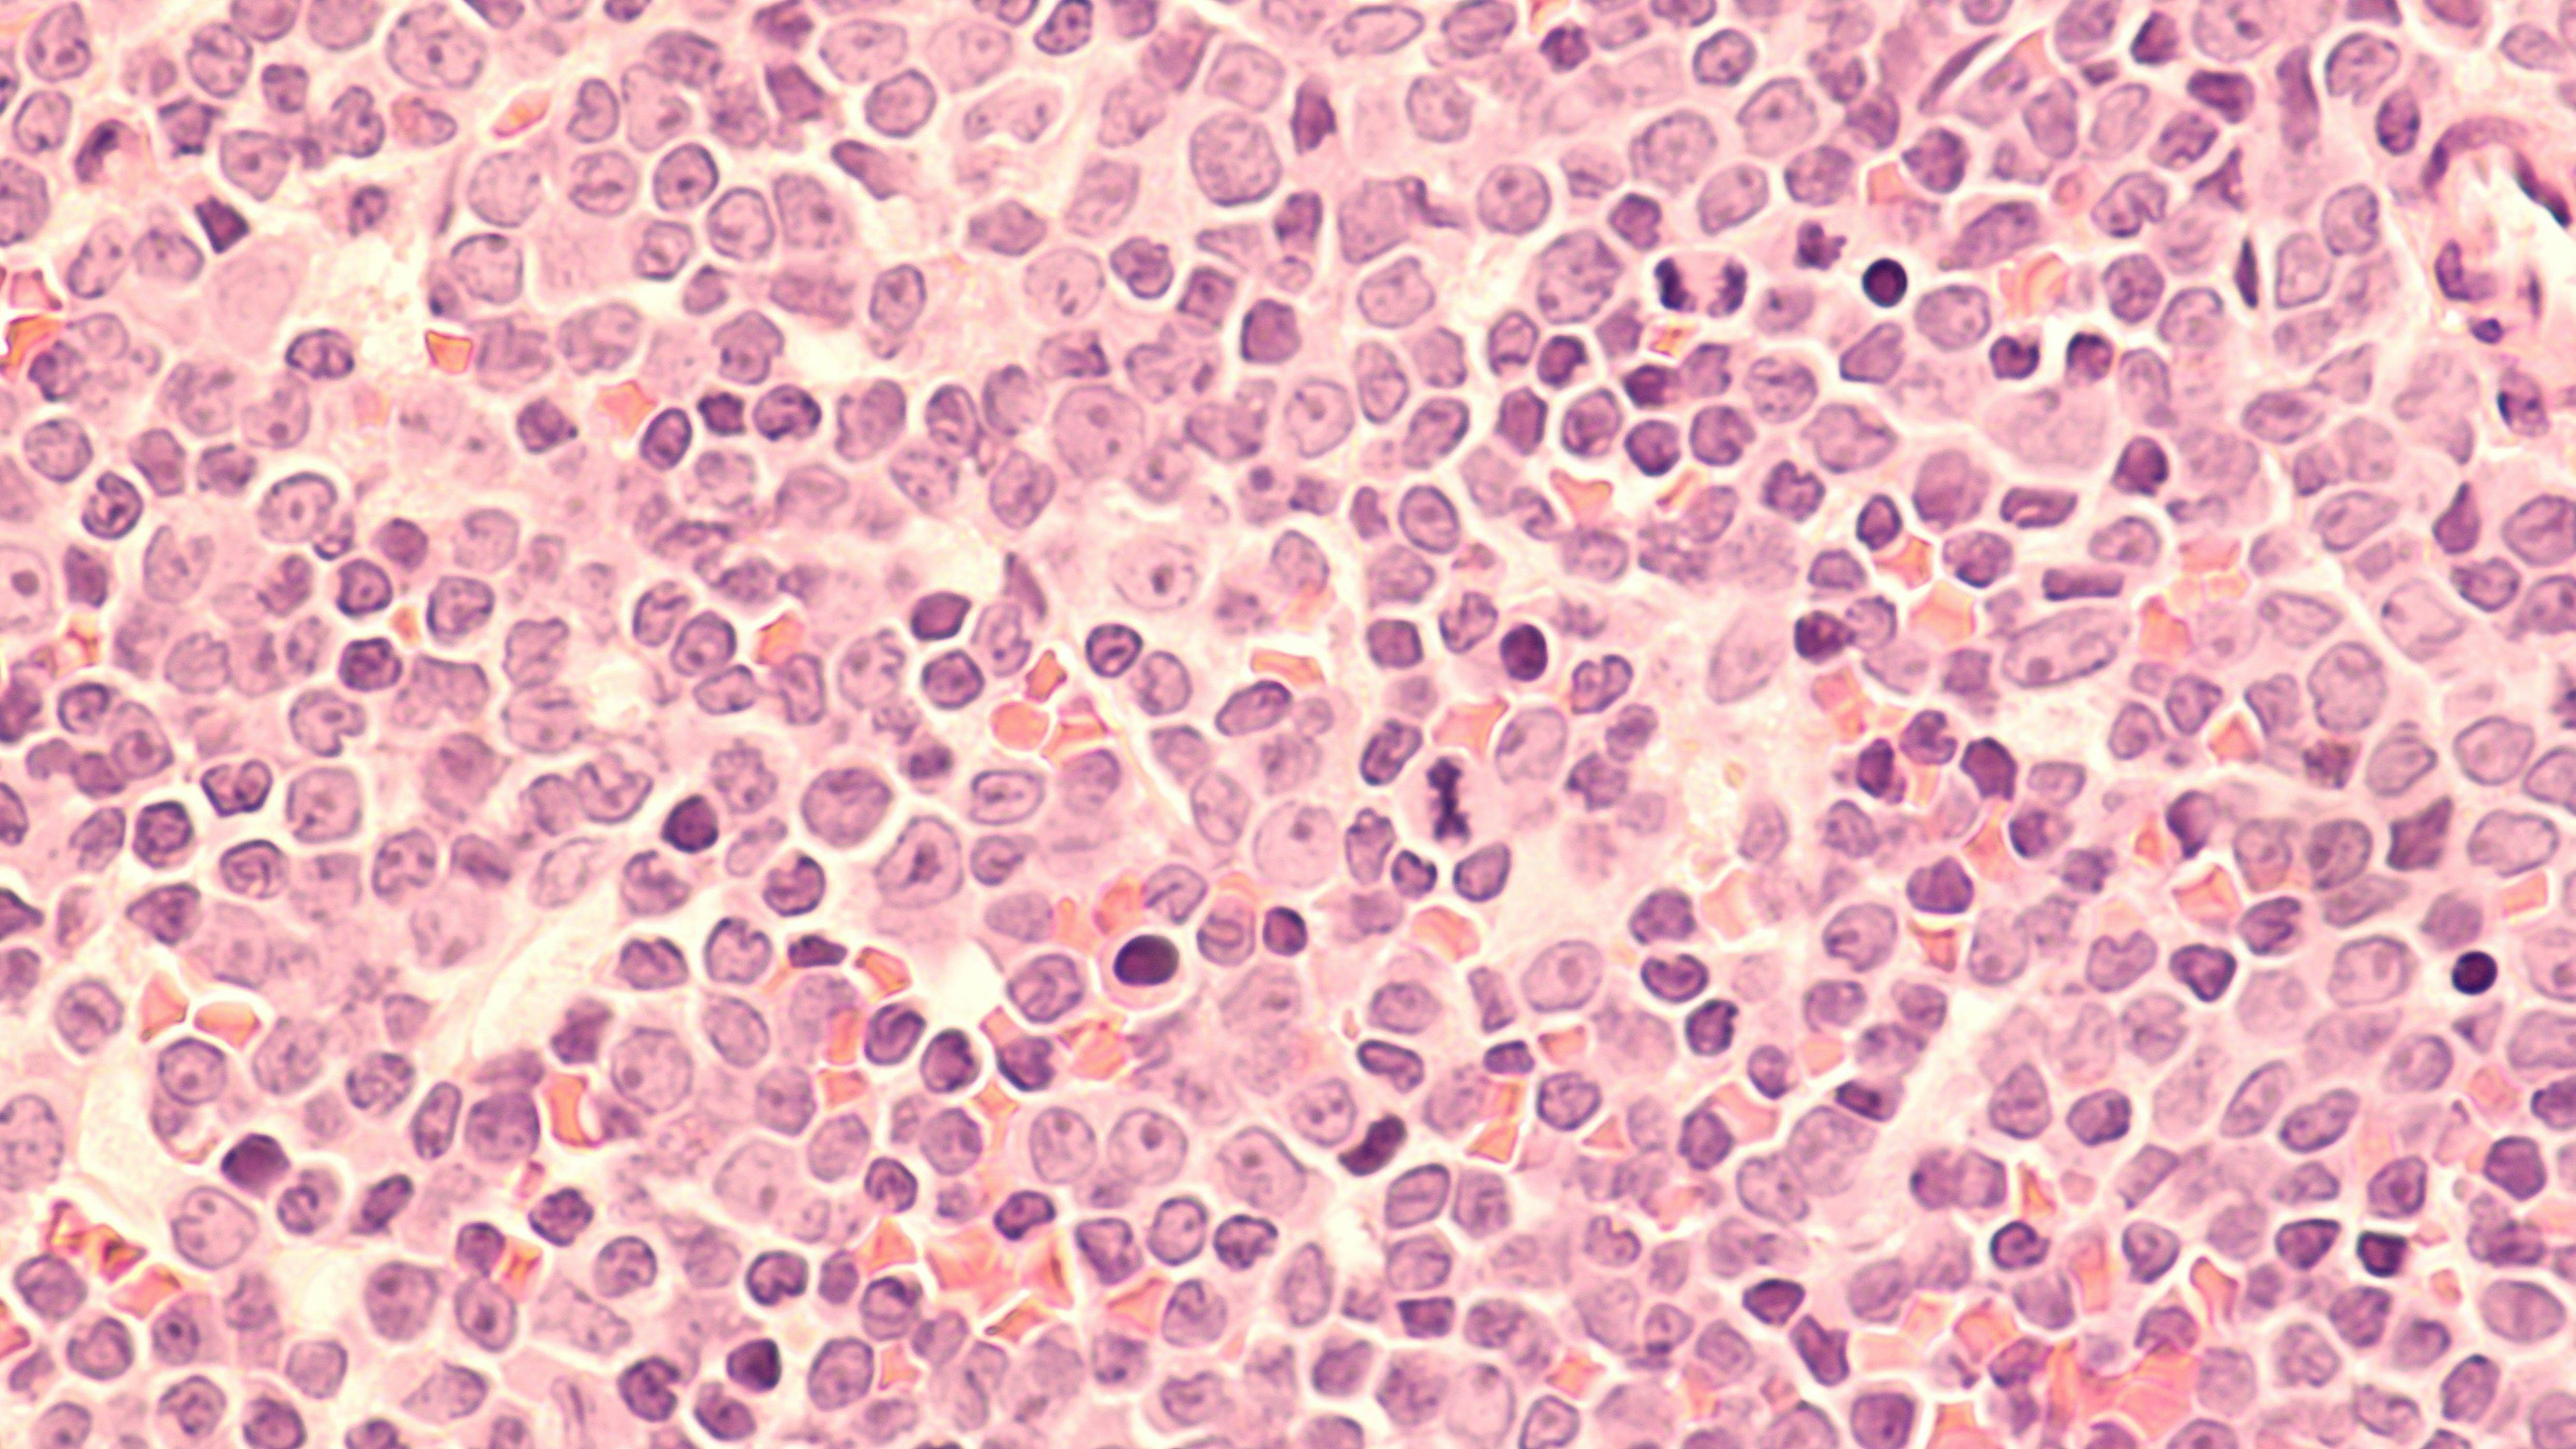 A staging bone marrow biopsy shows replacement of normal elements by diffuse large B-cell lymphoma, a type of non Hodgkin lymphoma, a malignancy (cancer) of lymphocytes, in this case spread to bone. | Image Credit © David A Litman - stock.adobe.com 